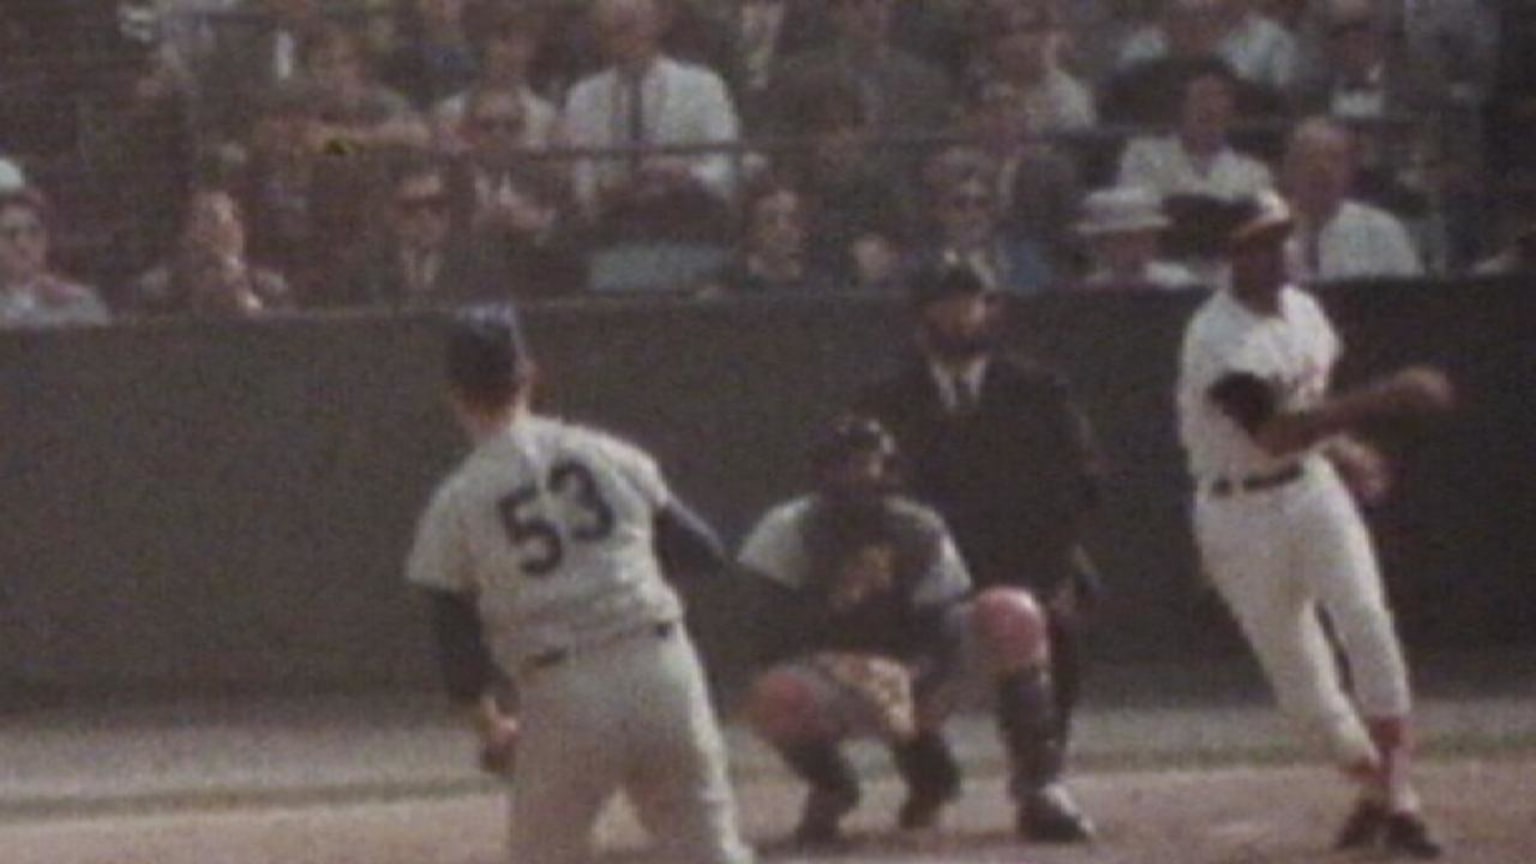 May 8, 1966: Frank Robinson smashes home run completely out of